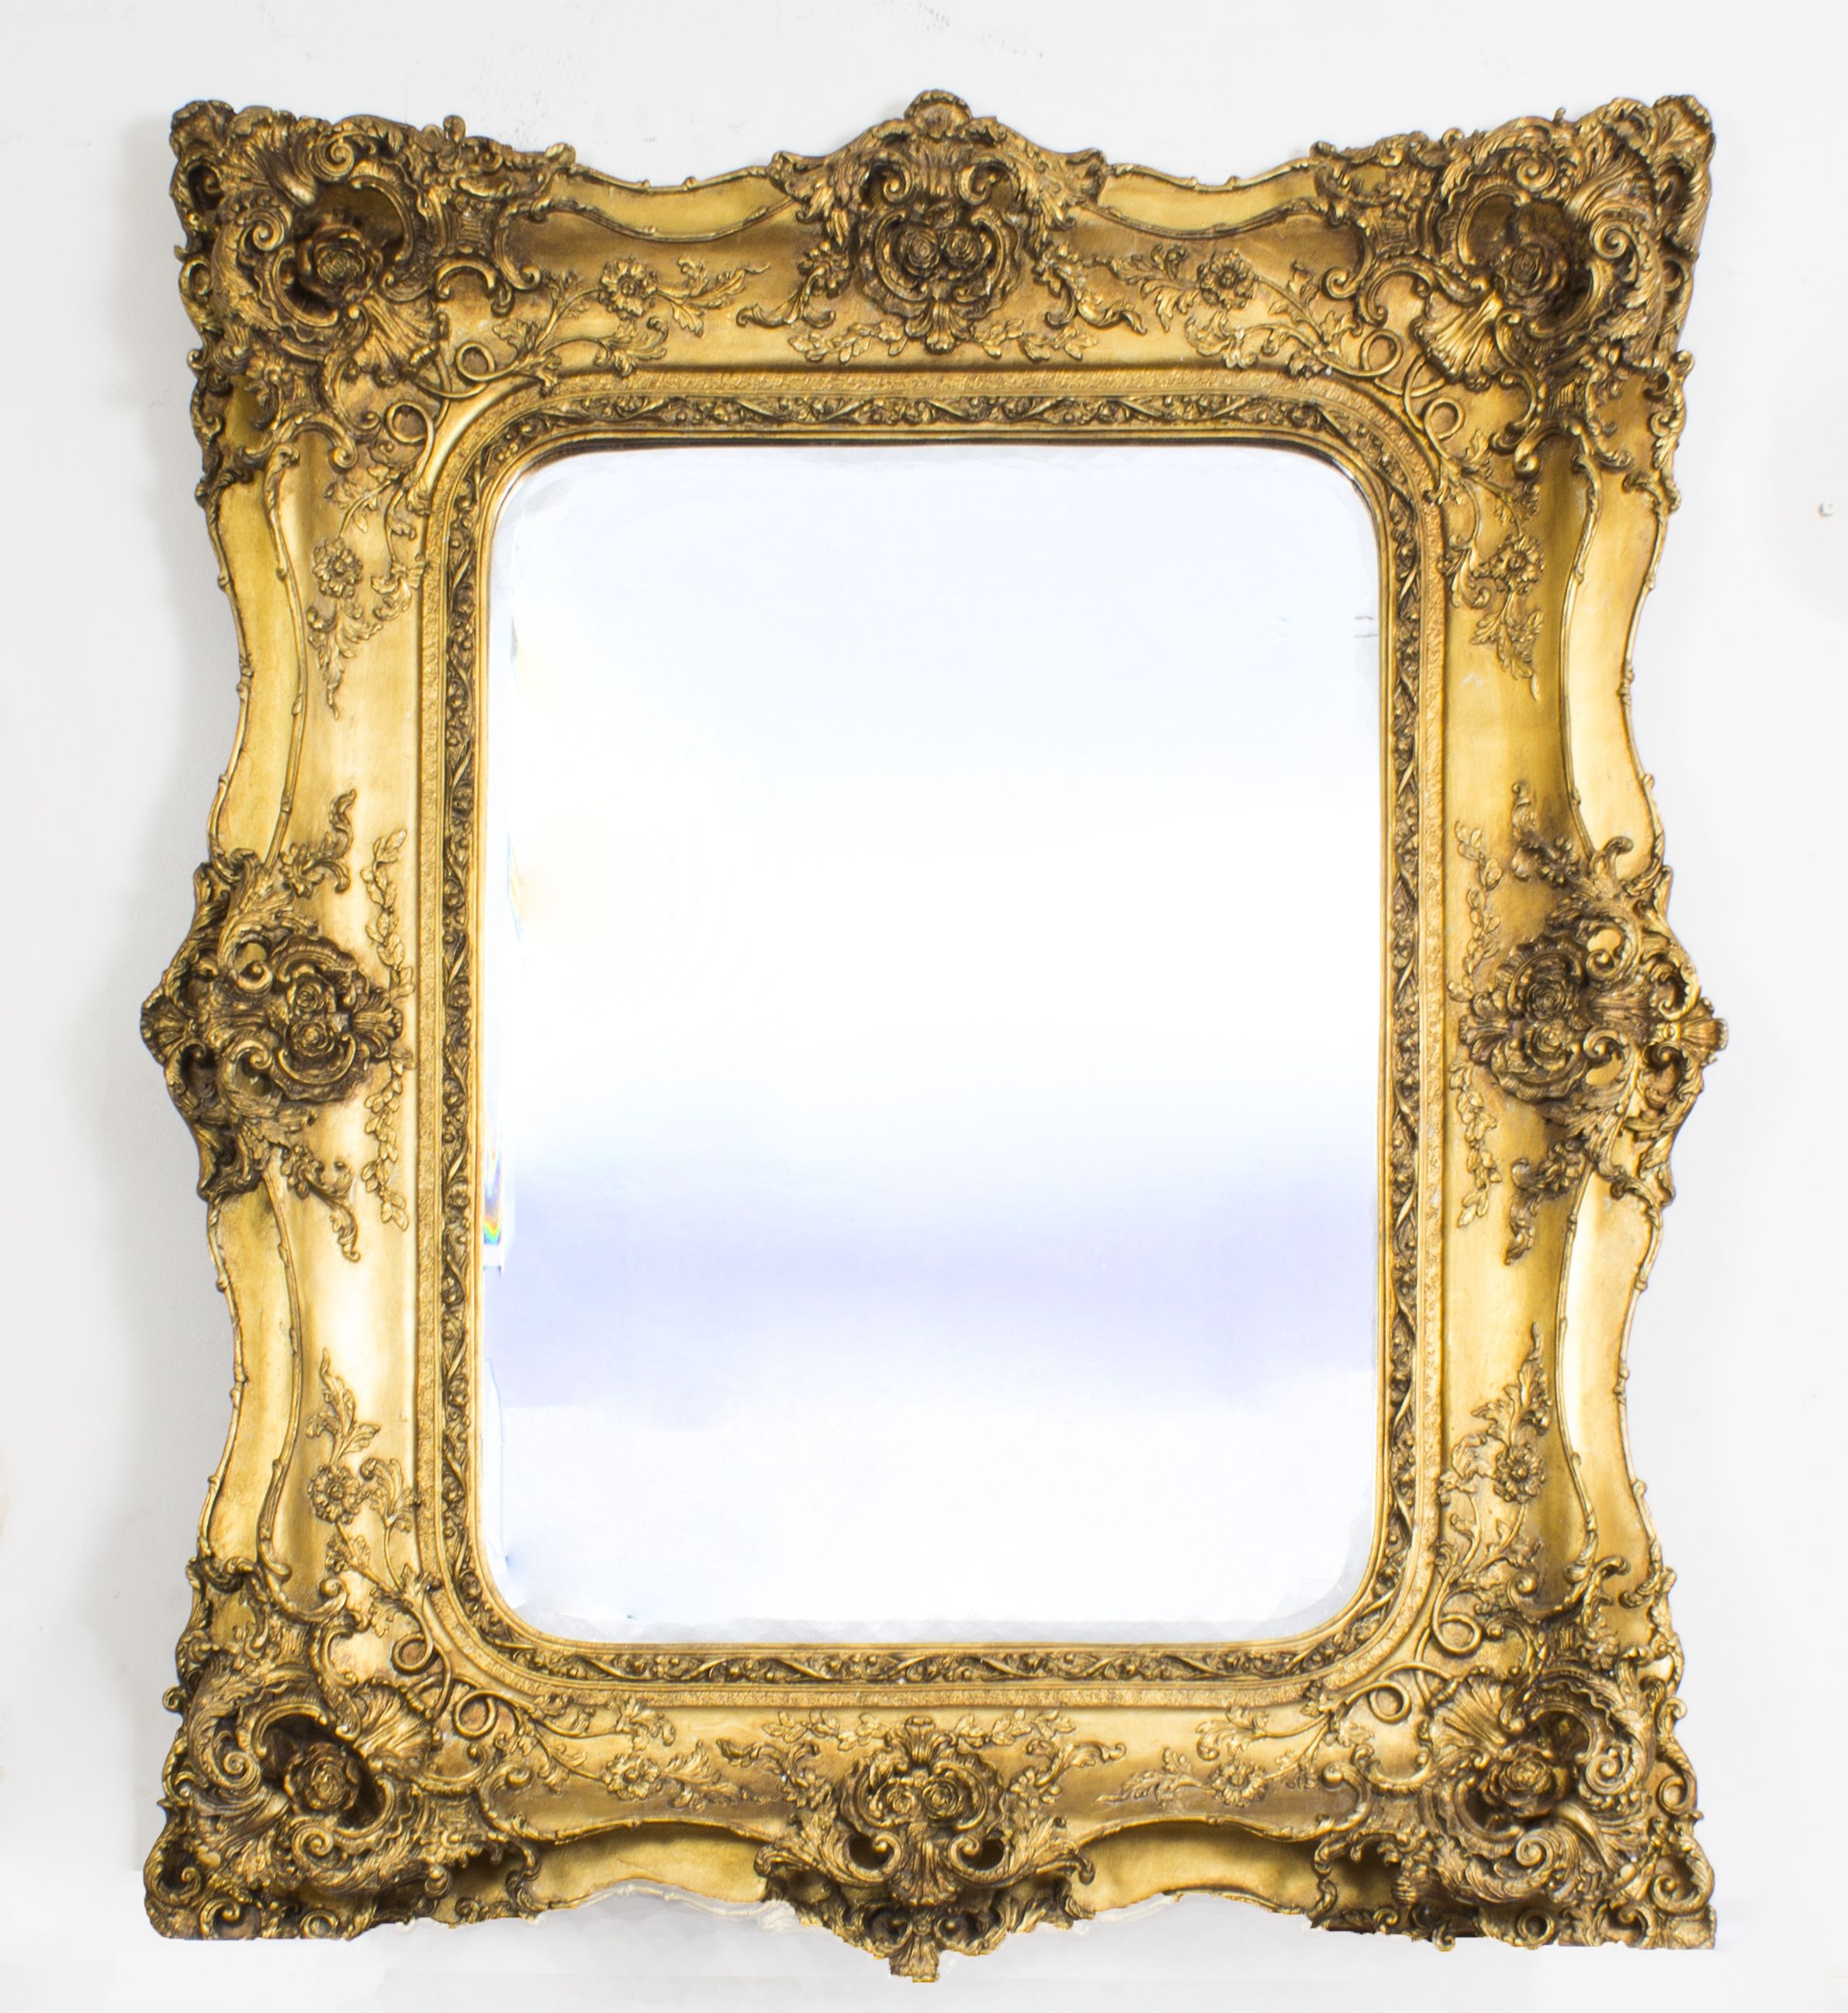 Stunning Large Ornate Italian Gilded Mirror 122 X 101 Cm Pertaining To Large Ornamental Mirrors (View 9 of 15)